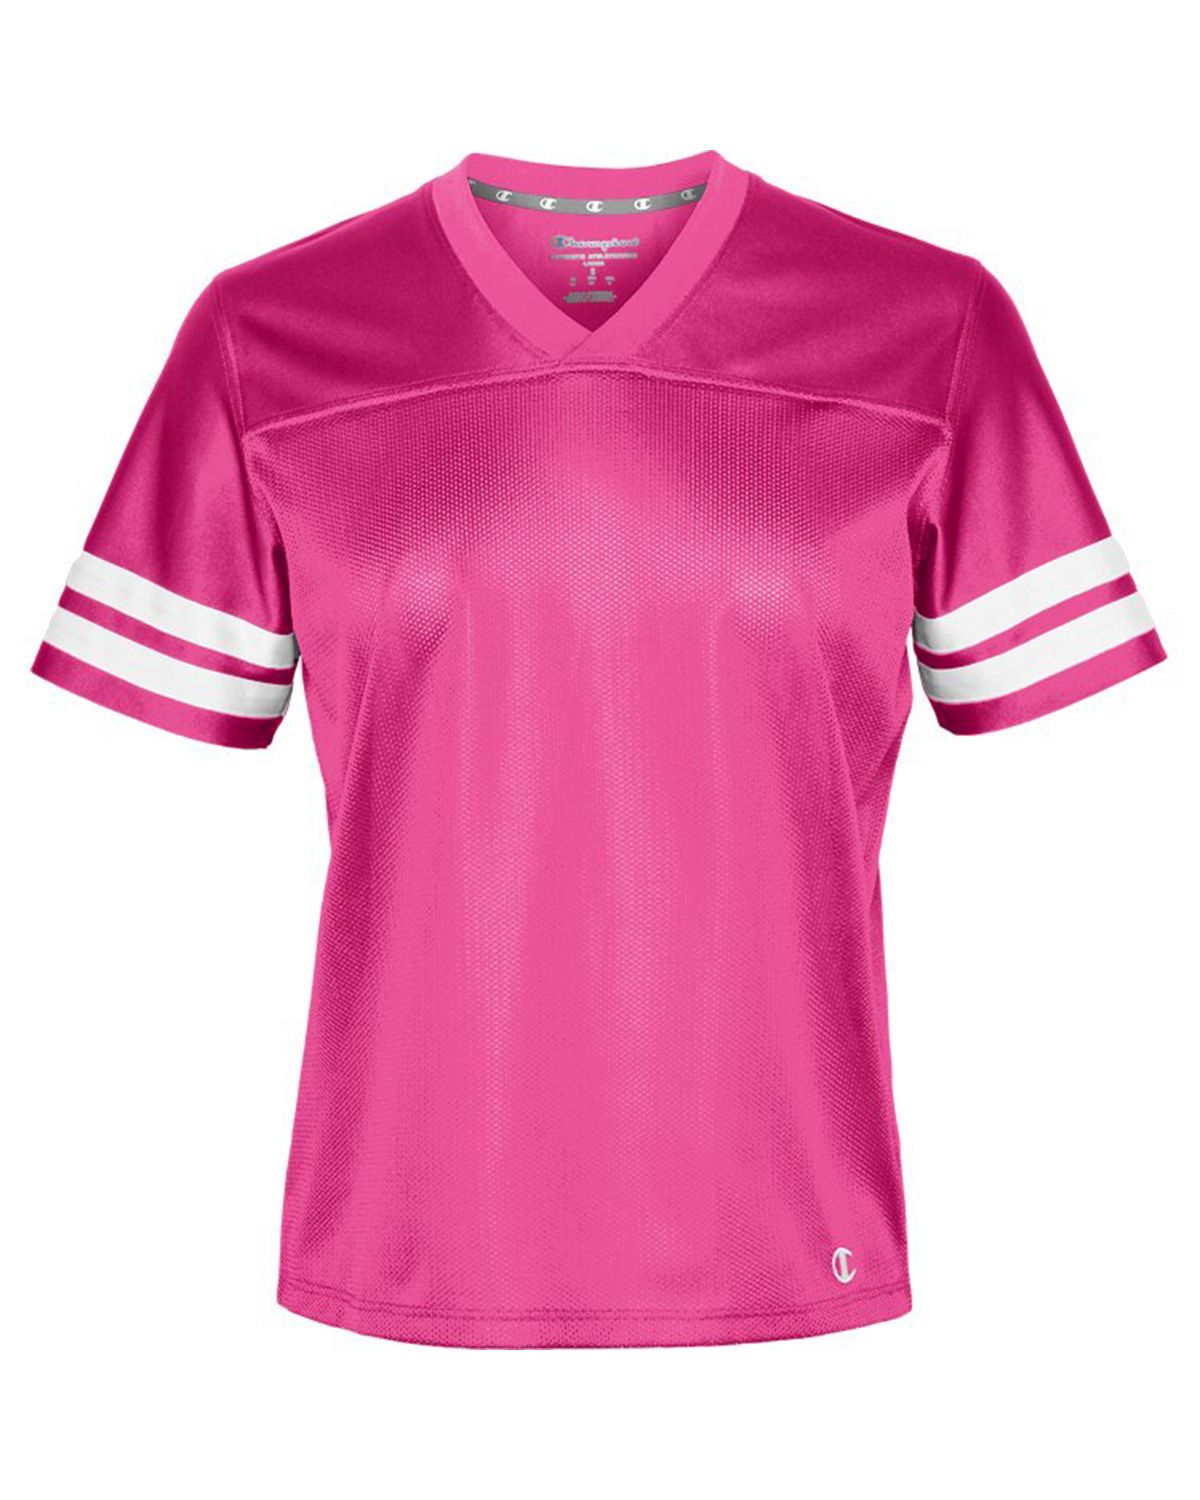 Champion 0350TL Women's Fan Jersey - Free Shipping Available